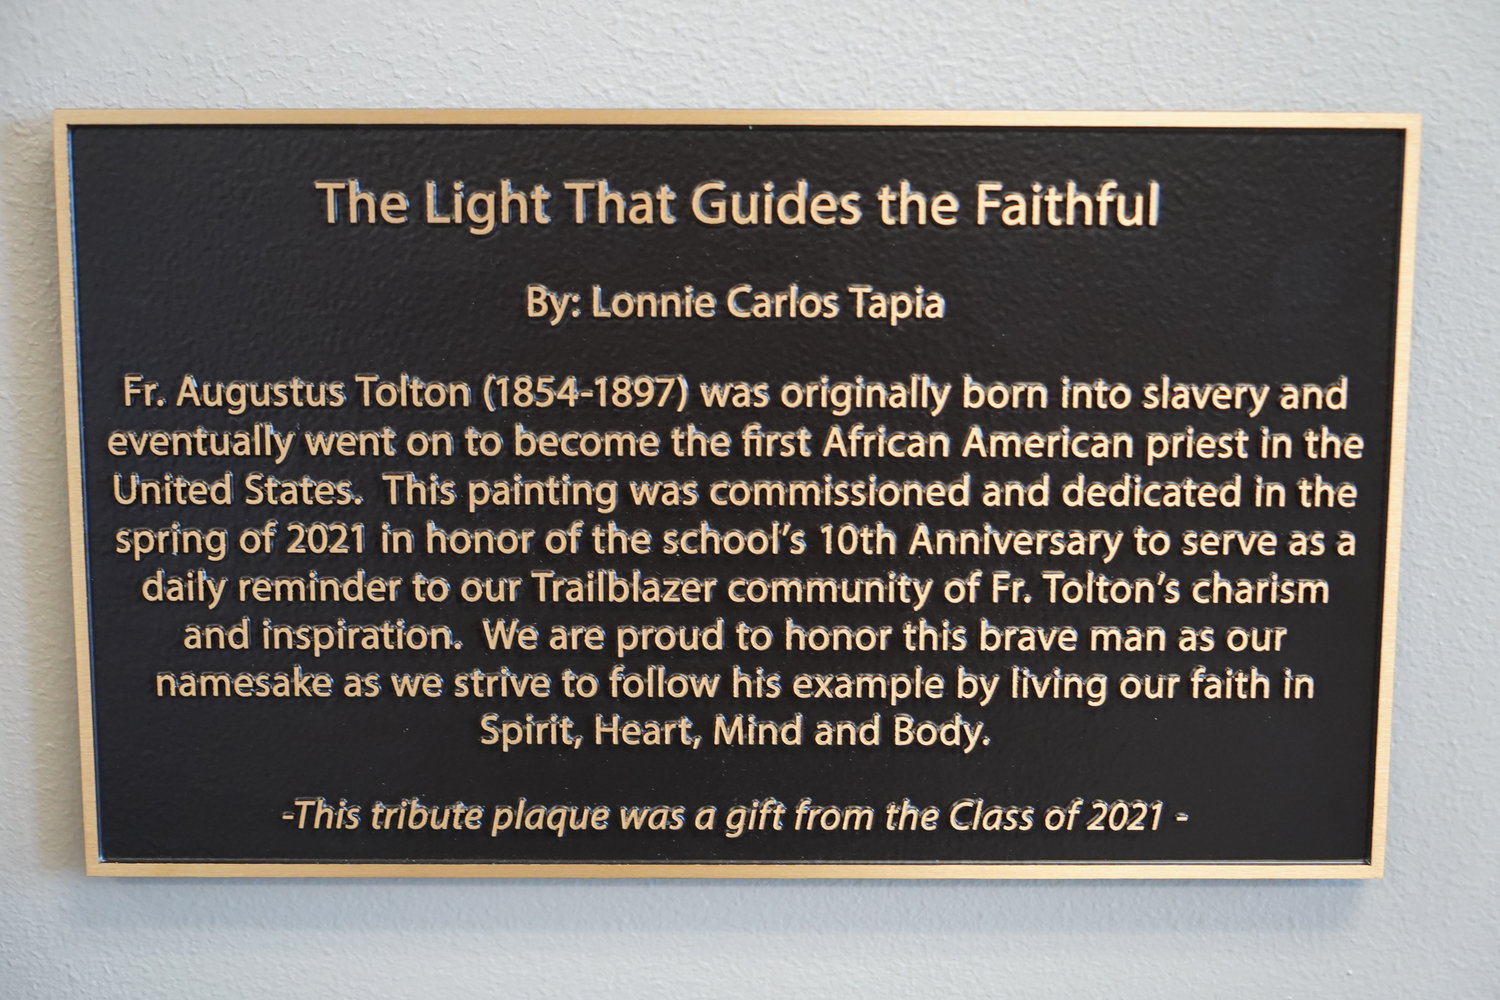 The school’s Class of 2021 donated the plaque beside the painting, which hangs in a busy area next to the chapel of the school building.